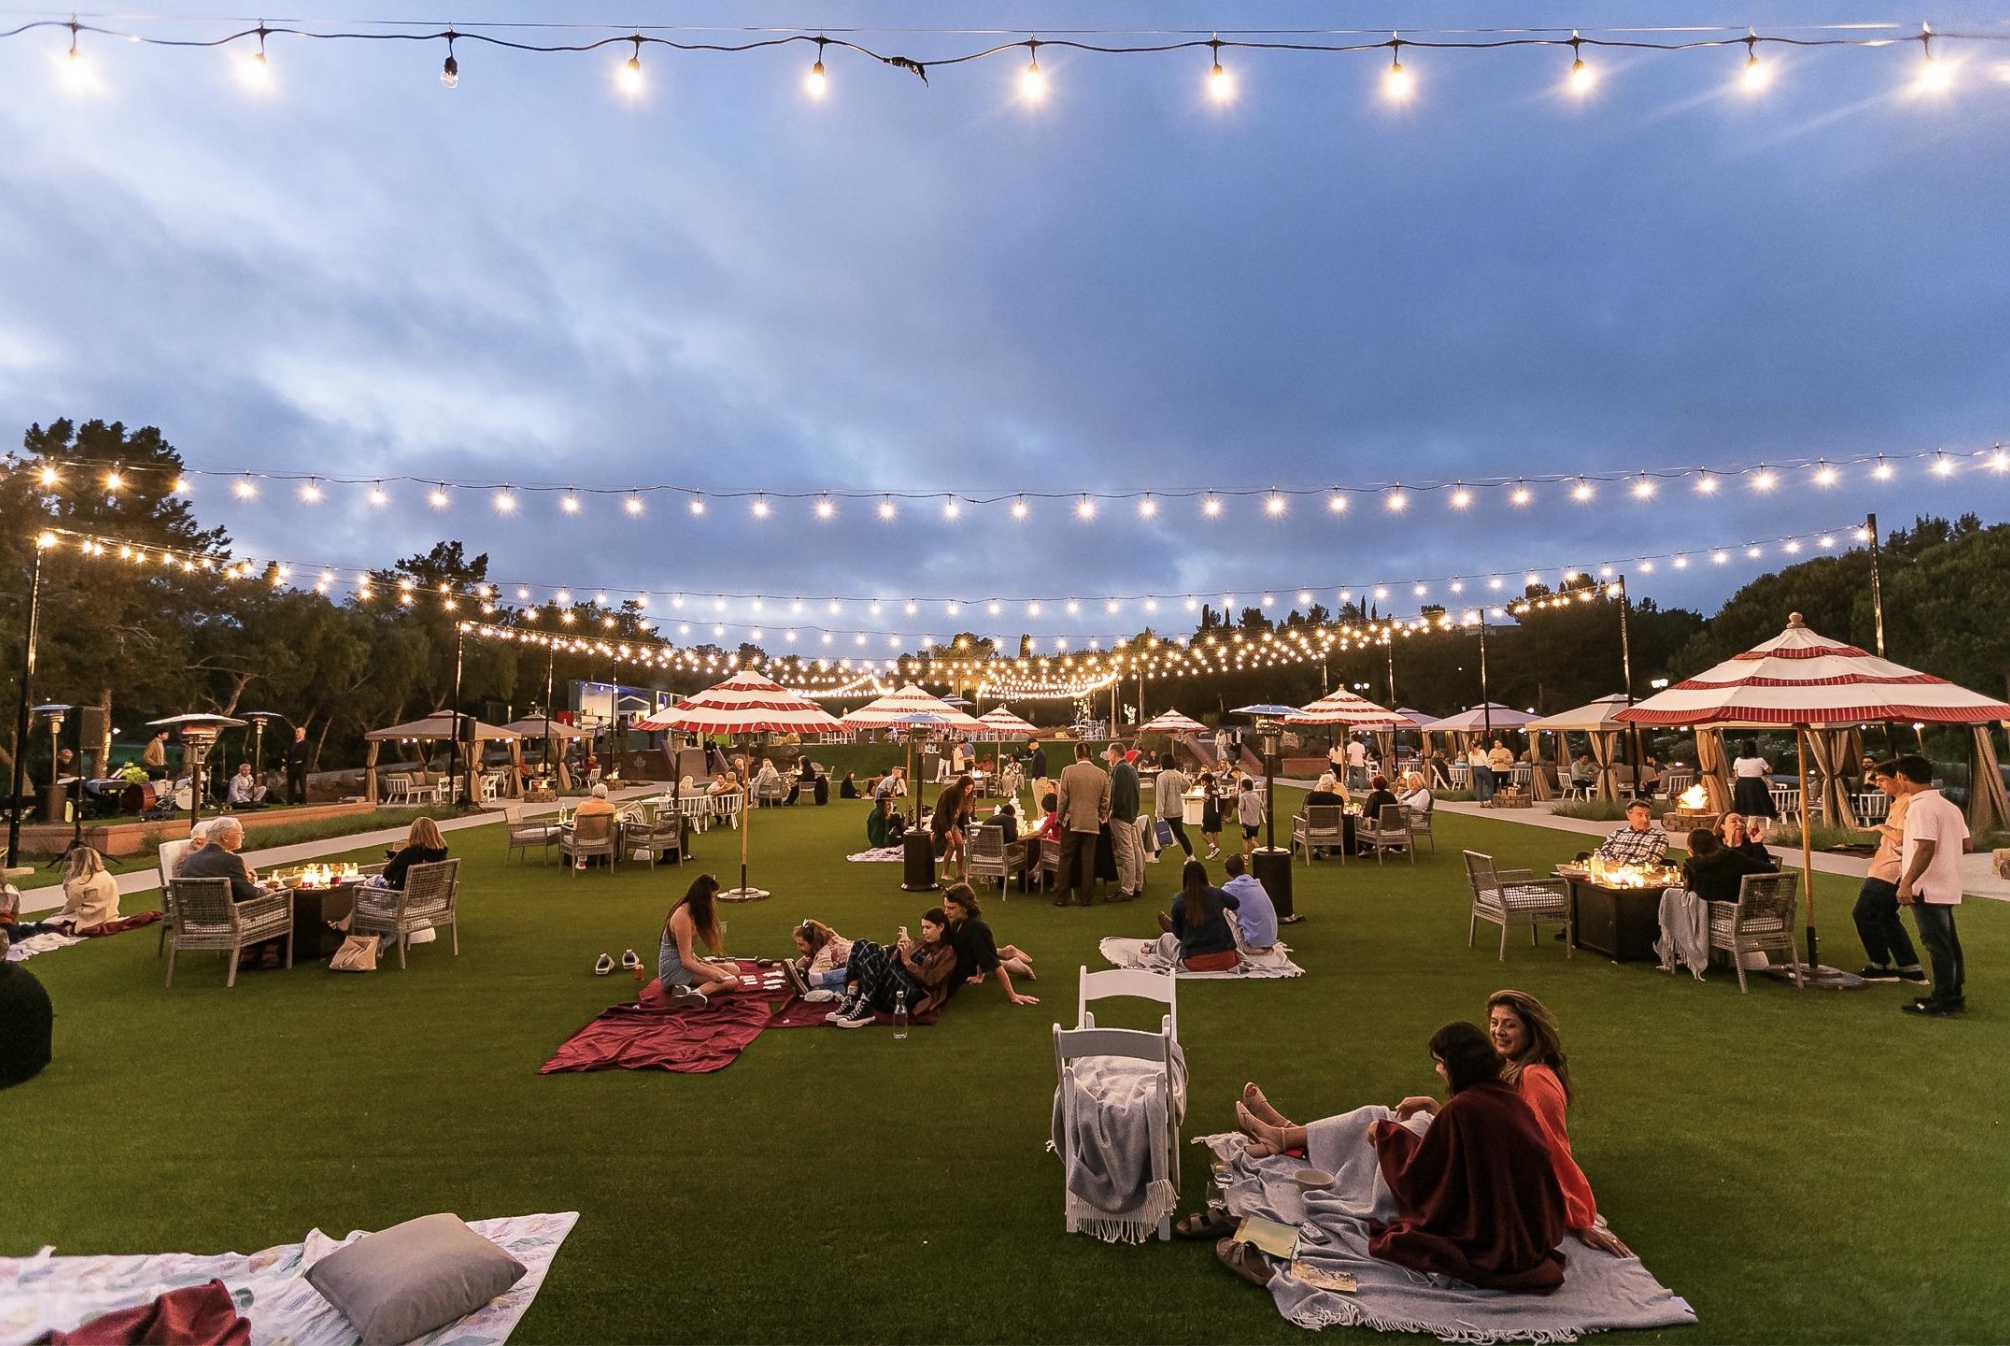 Cover Image for Open lawn area with string lights and people sitting on blankets and benches at the Fairmont Grand Del Mar